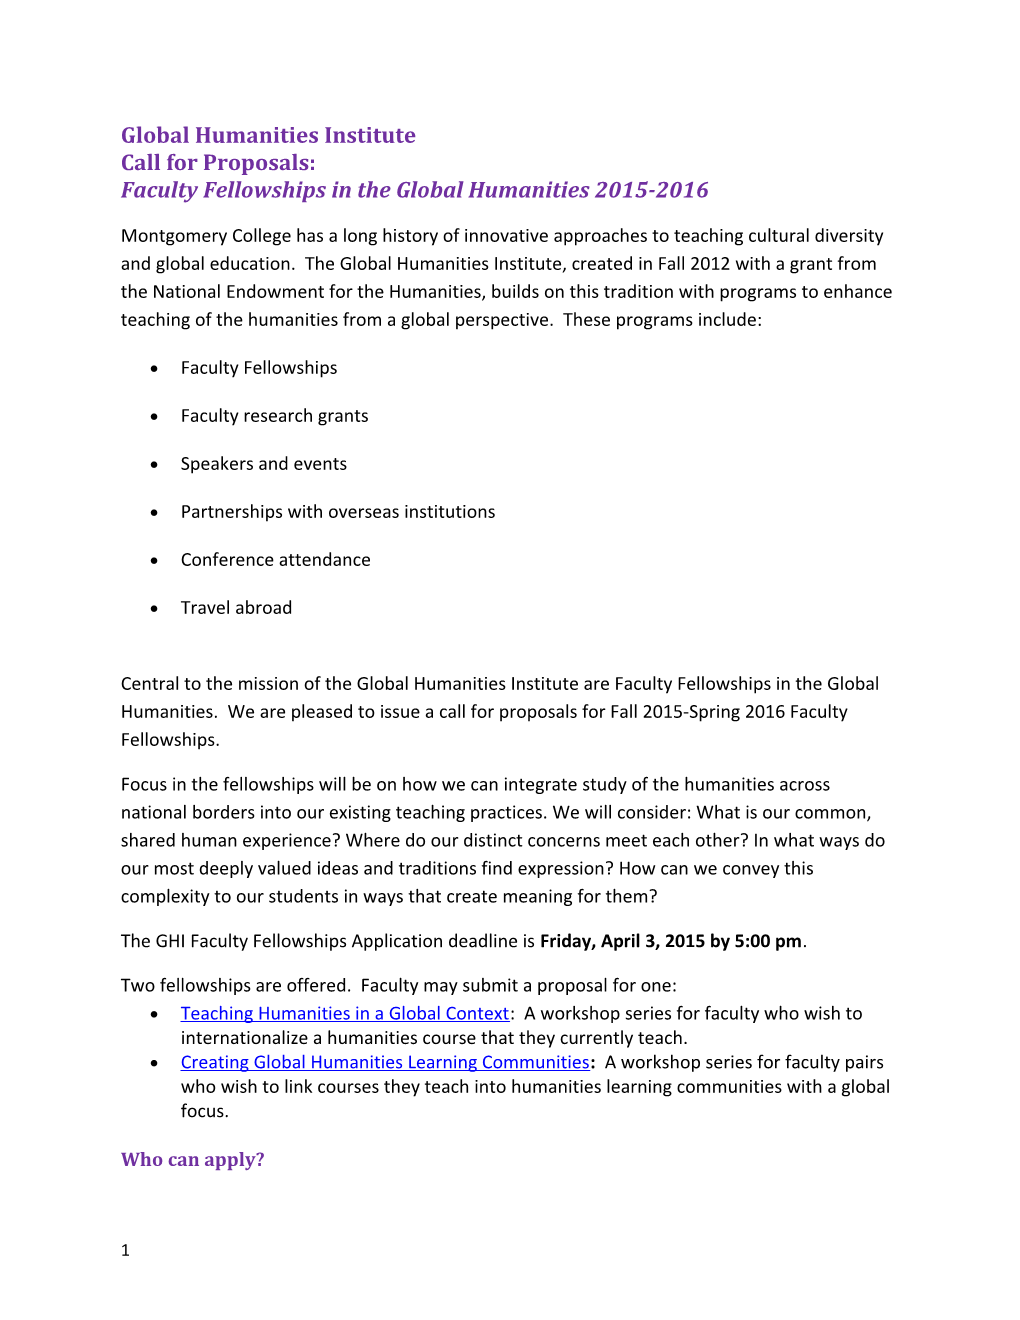 Facultyfellowships in the Global Humanities 2015-2016